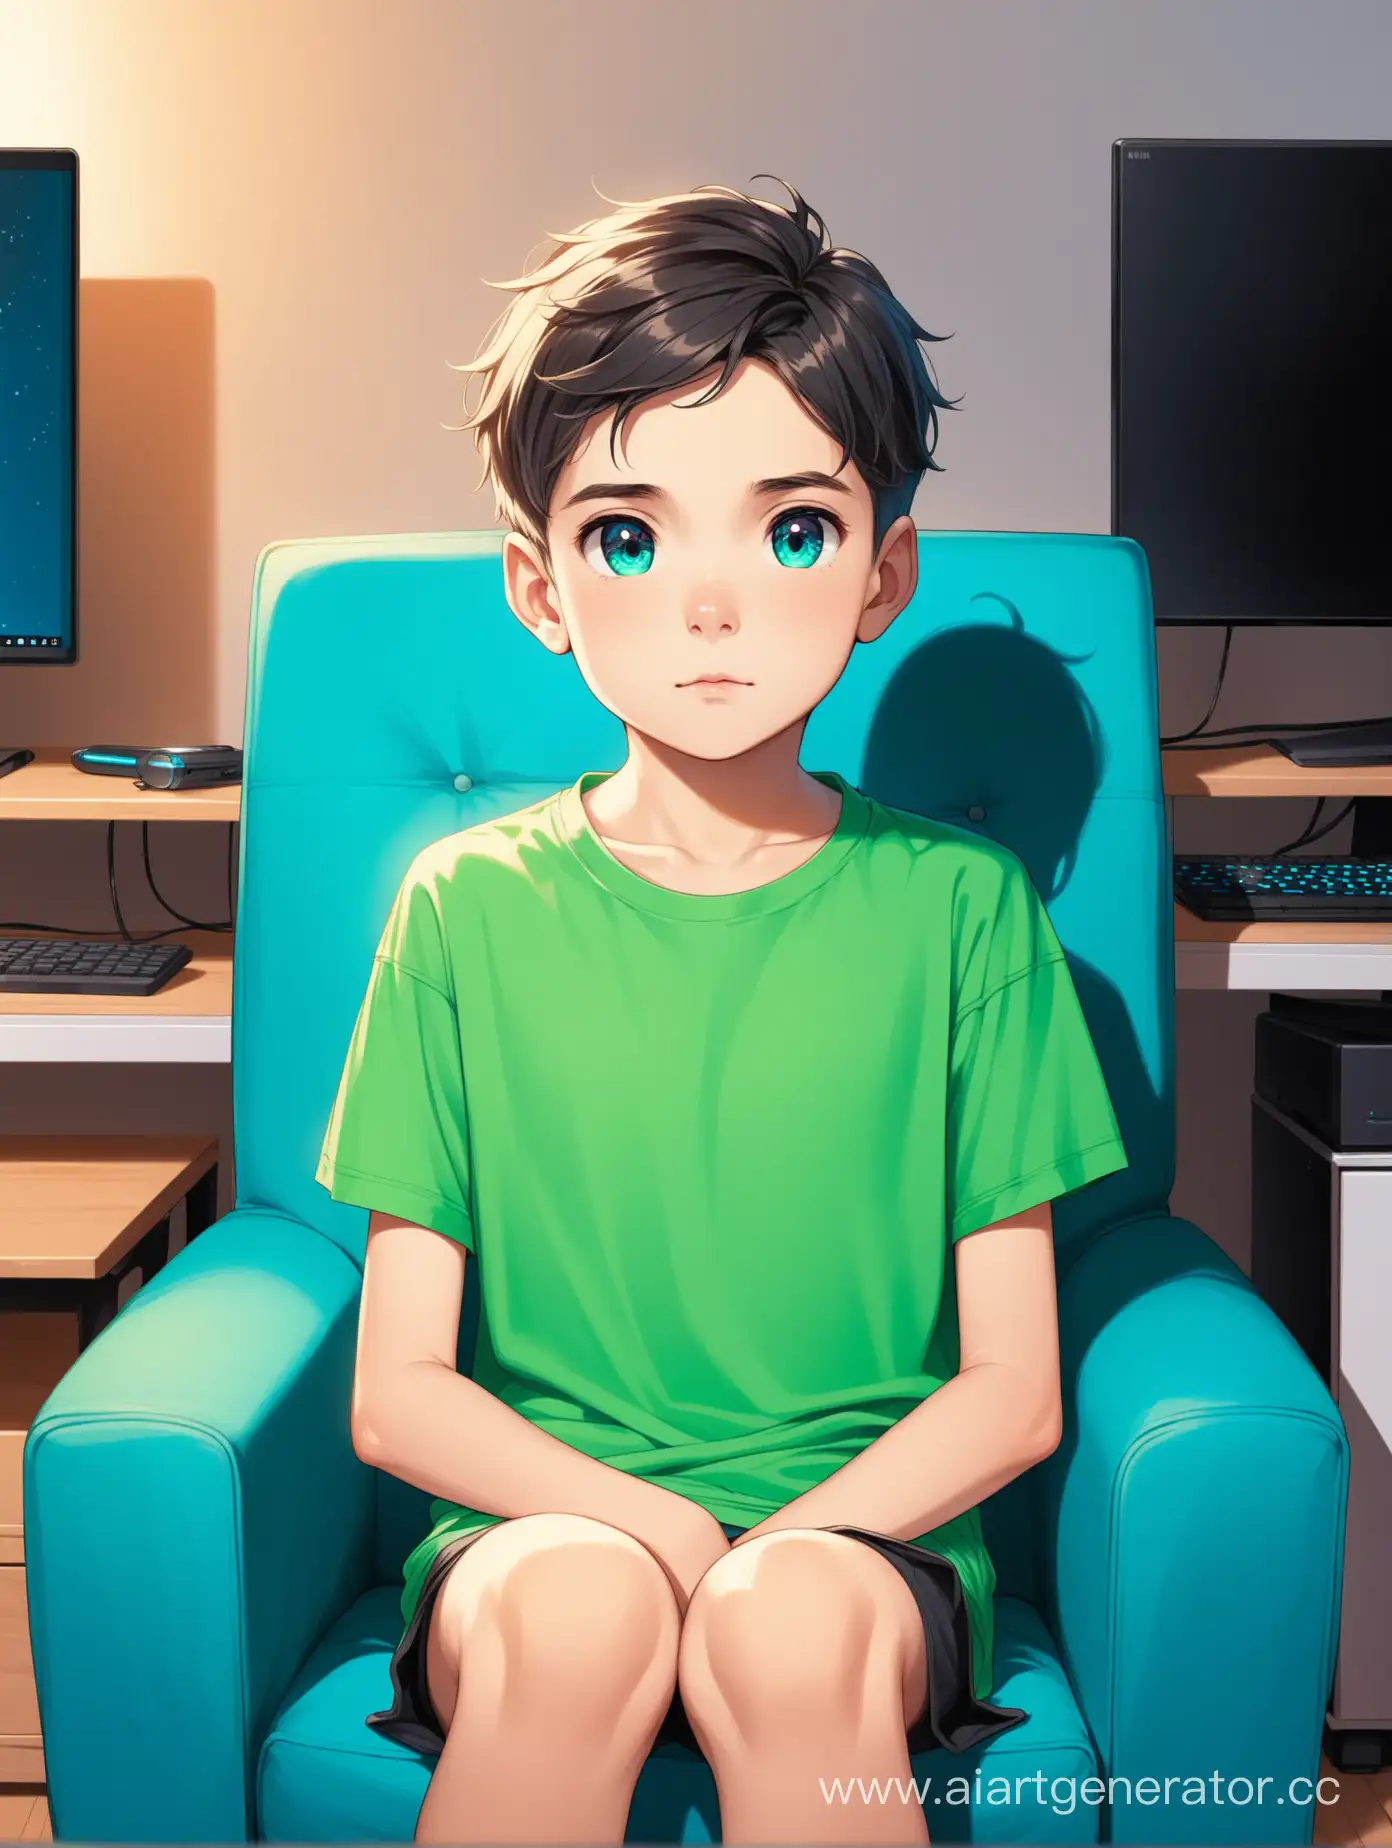 11YearOld-YouTuber-Janus-Streaming-from-His-Blue-Armchair